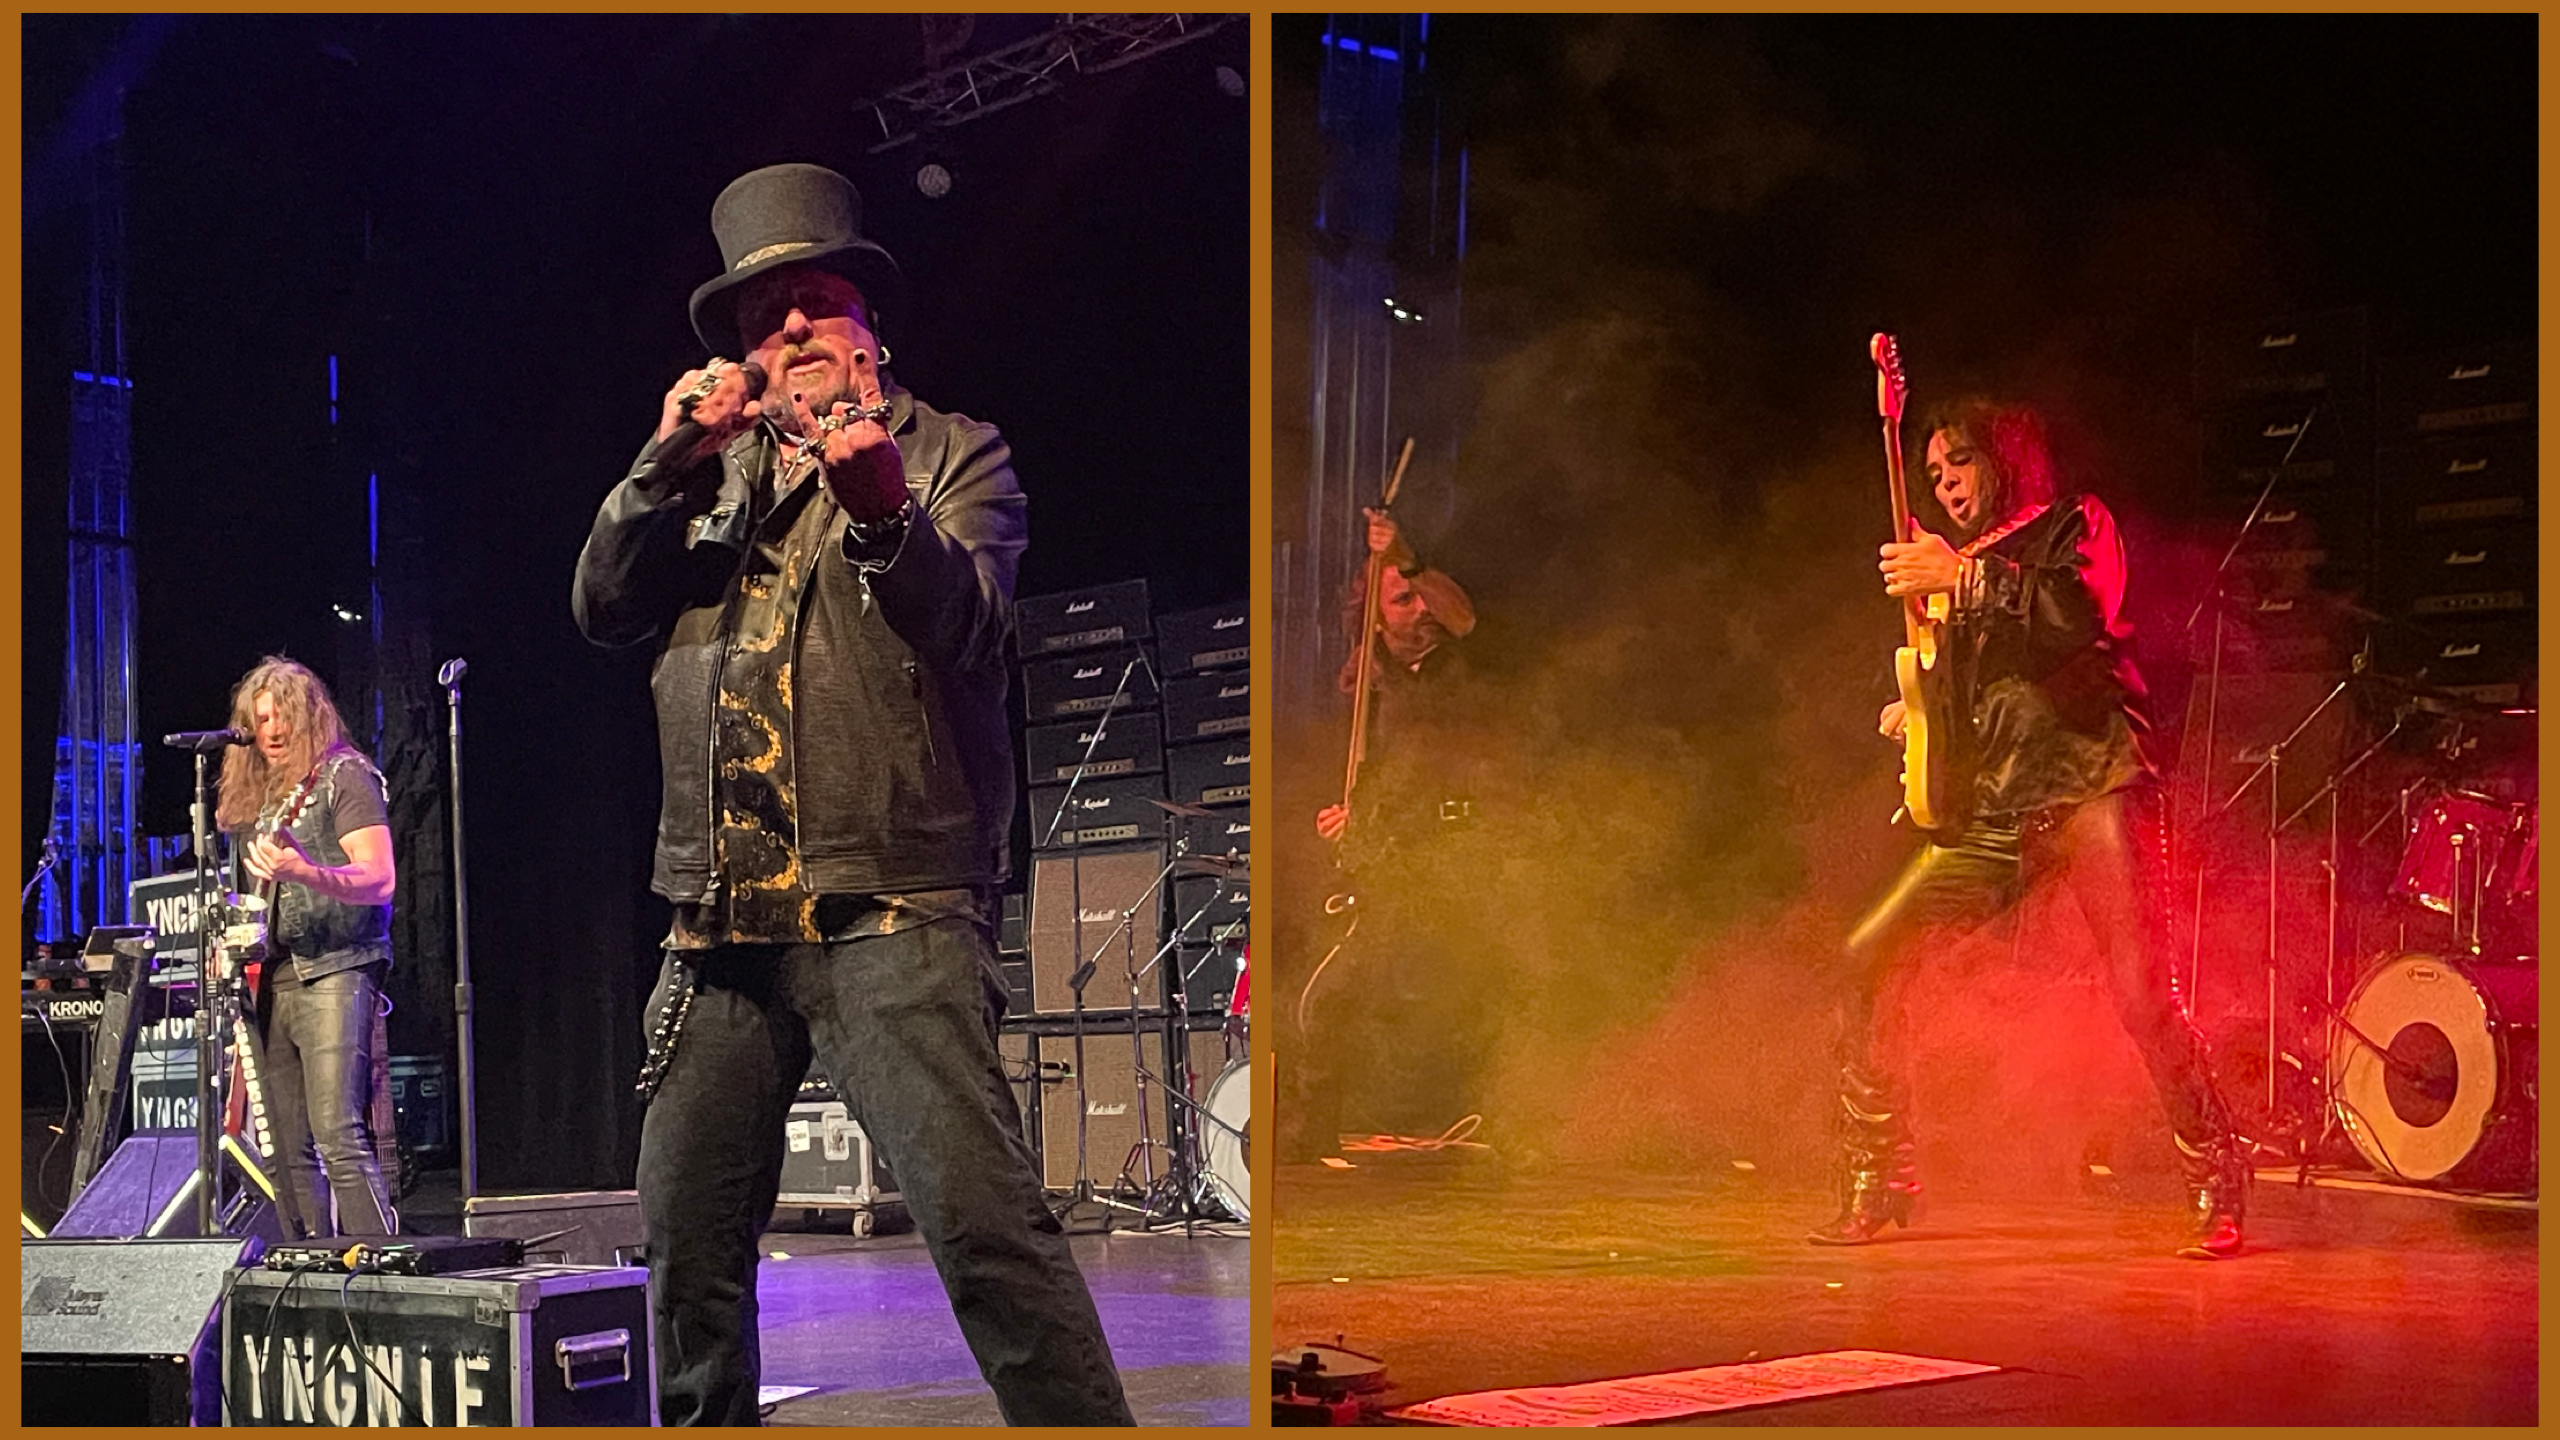 On the left, two men dressed in black perform on a stage. On the right, a guitarist dressed in black leather and surrounded by smoke performs.